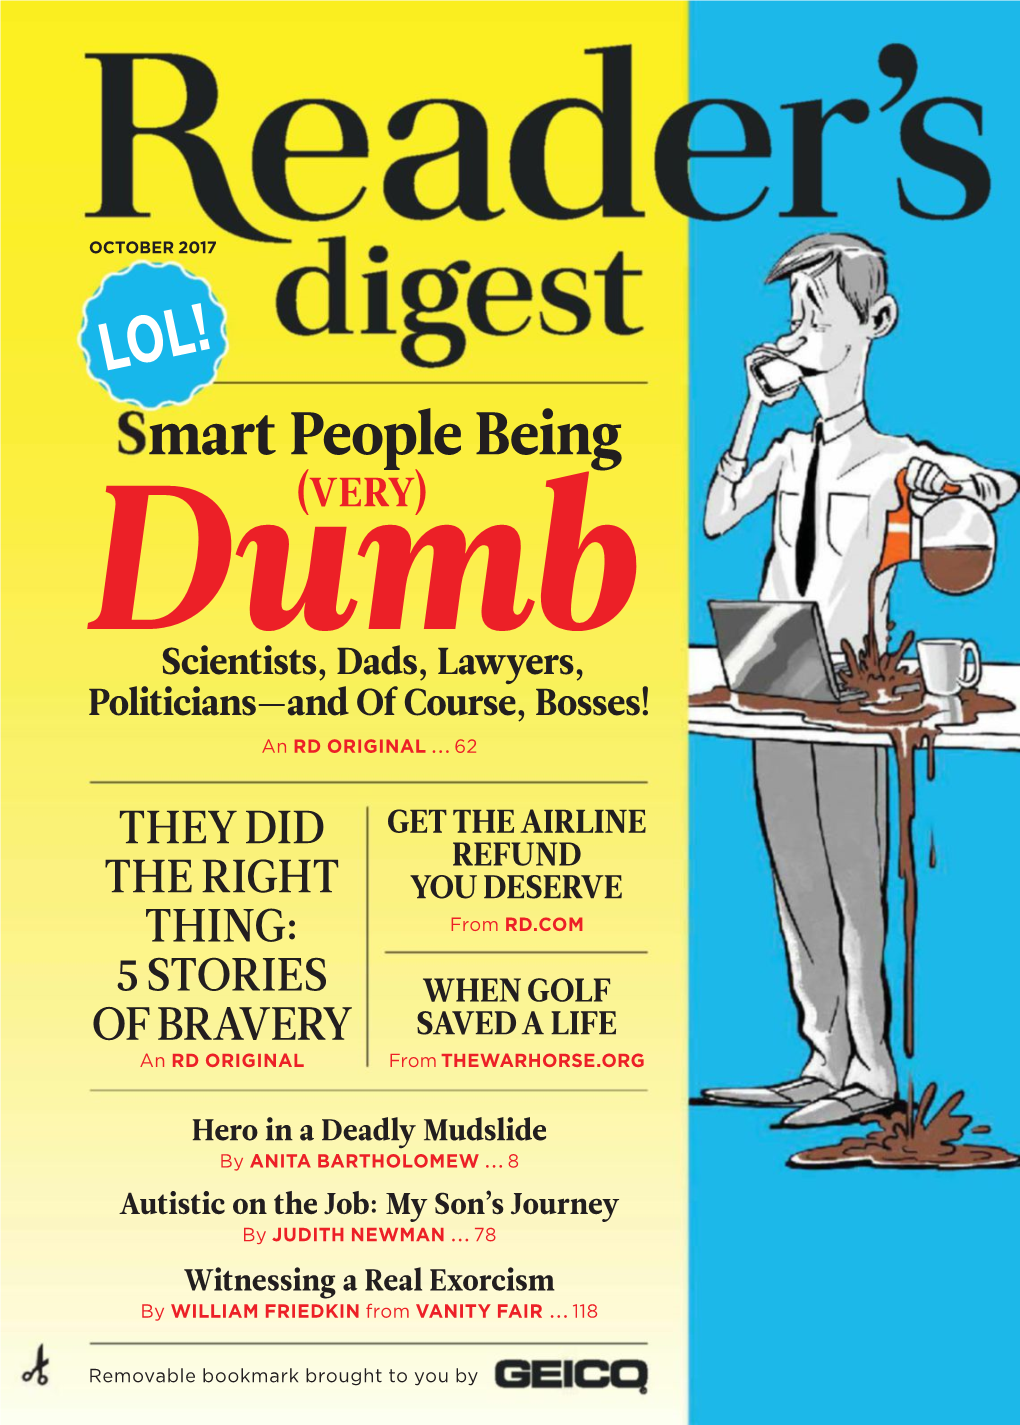 Smart People Being Dumb(VERY) Scientists, Dads, Lawyers, Politicians—And of Course, Bosses! an RD ORIGINAL